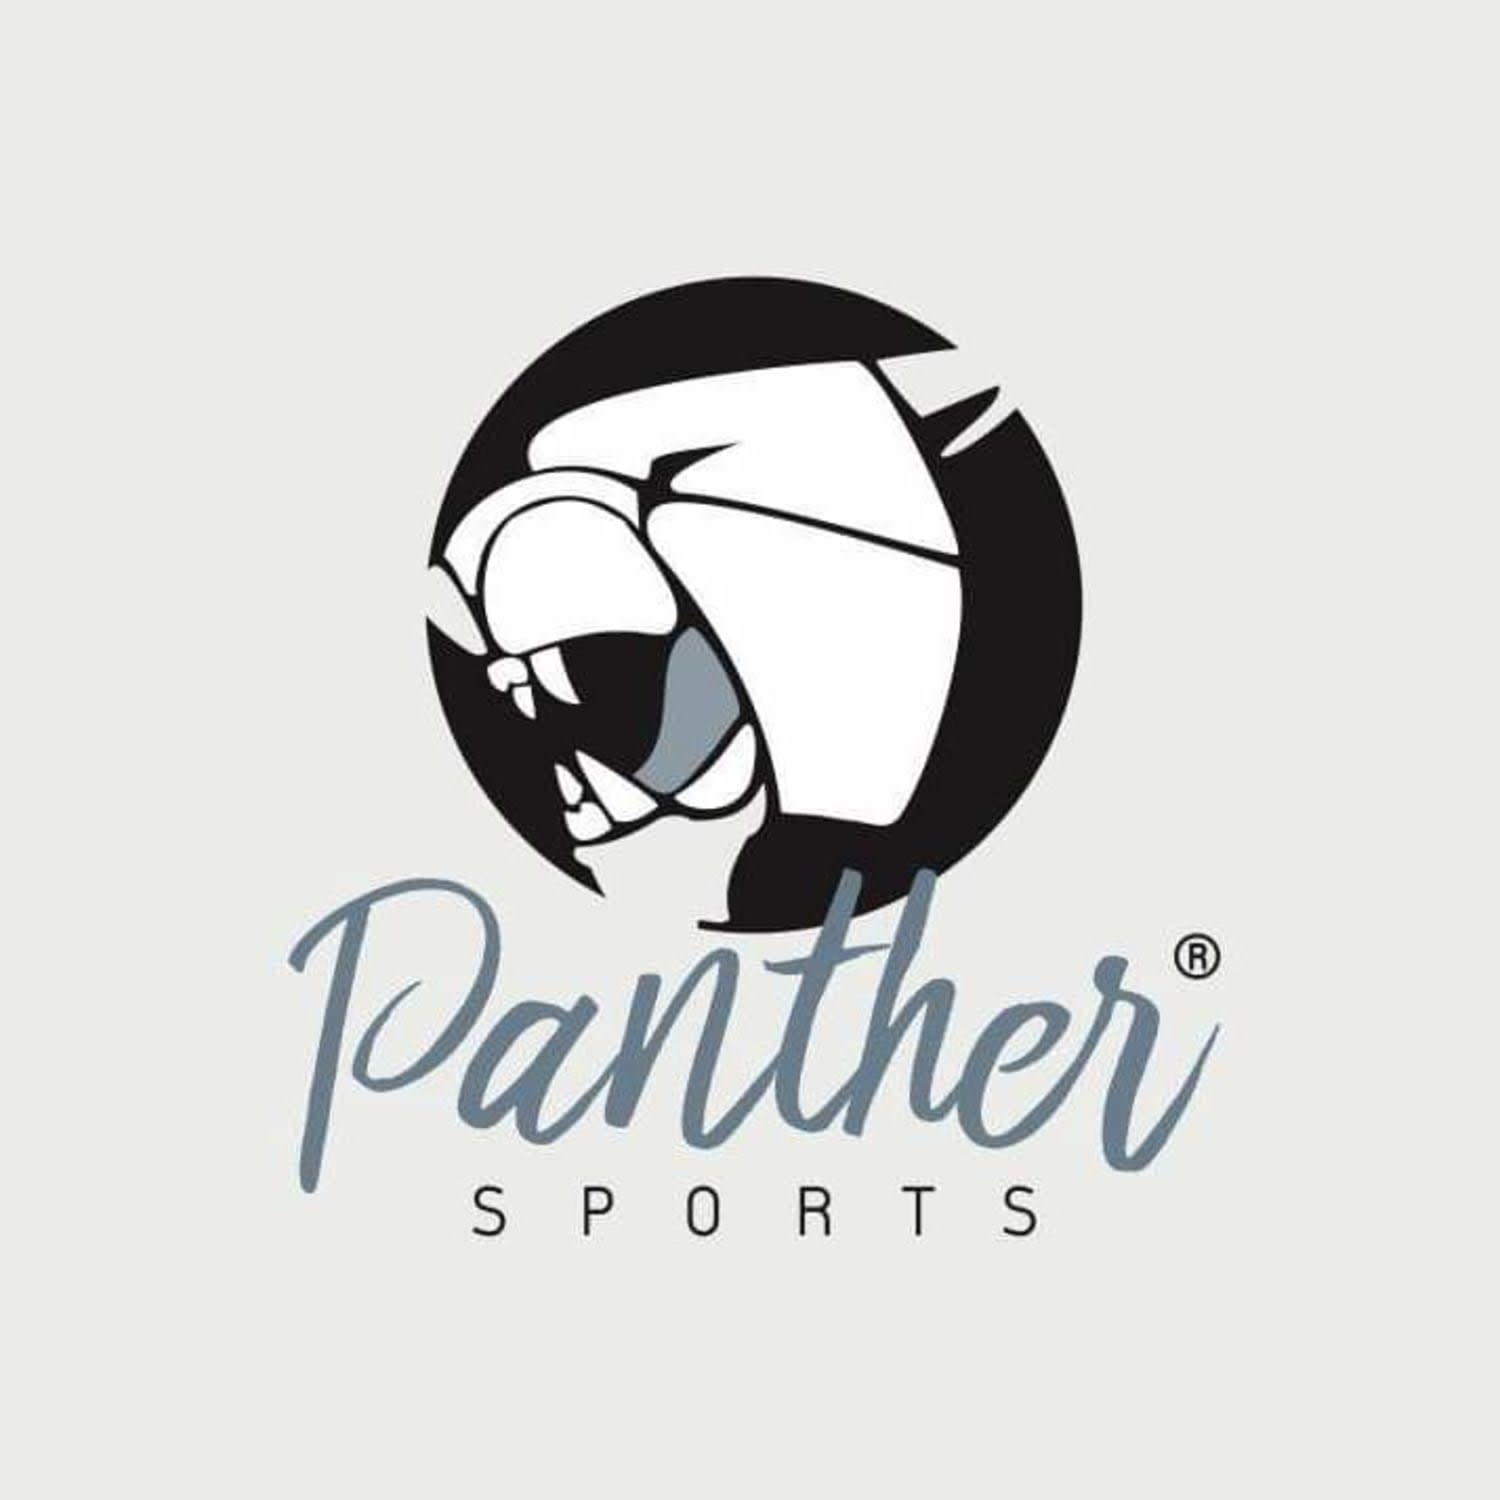 Panther Sports